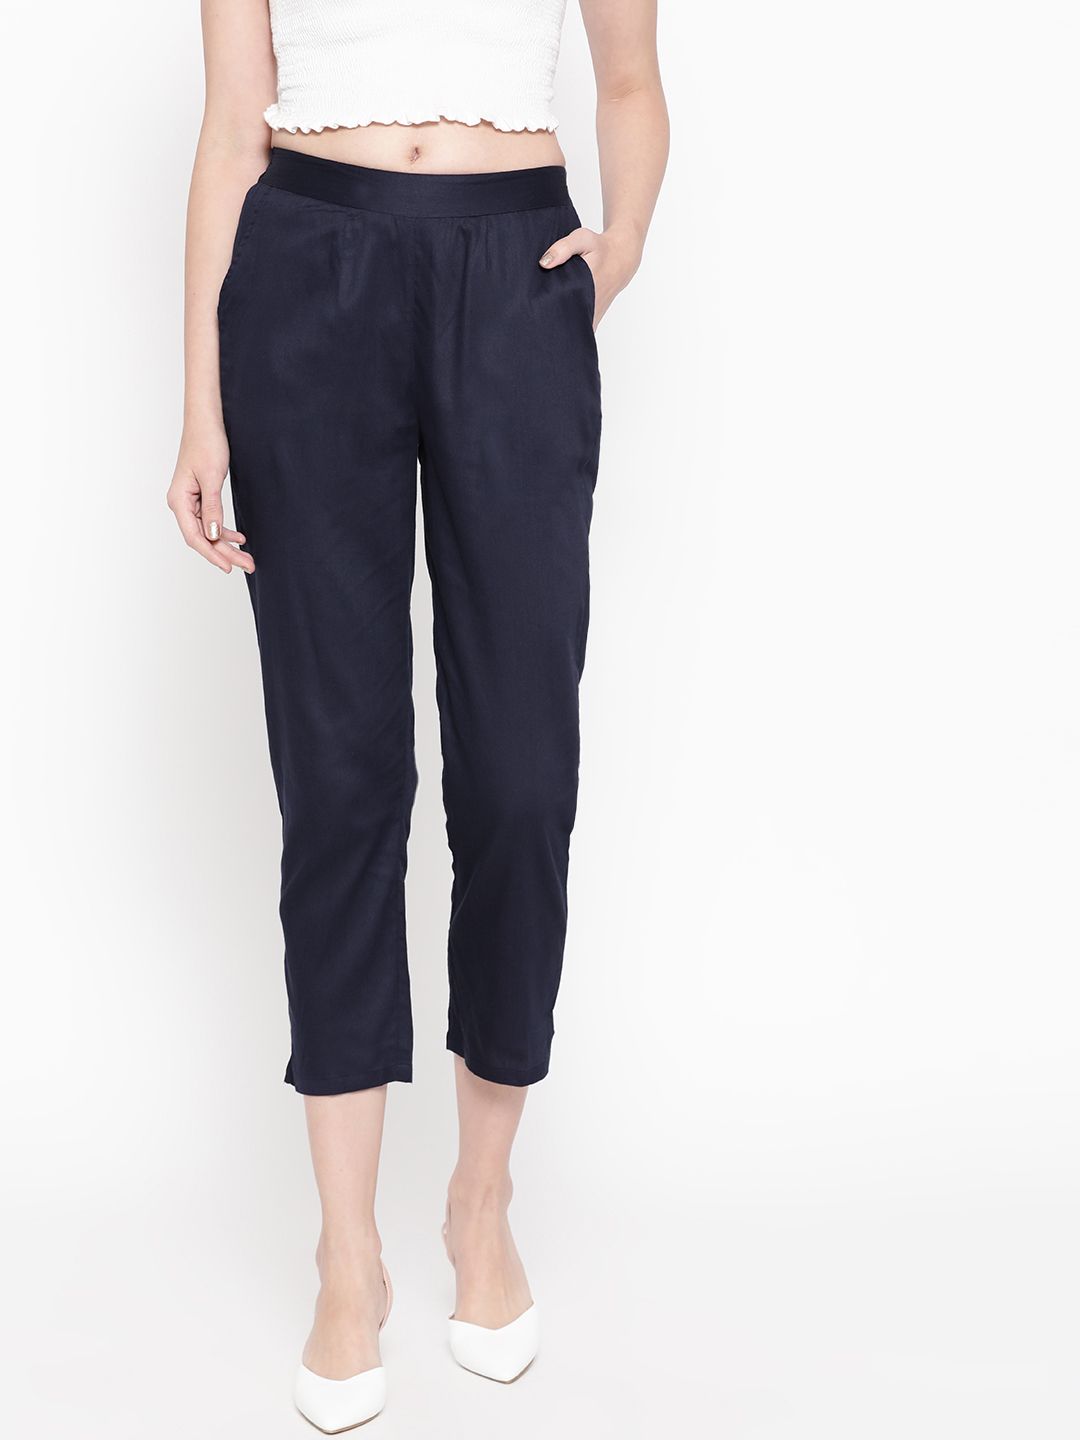 Be Indi Women Navy Blue Regular Fit Solid Regular Trousers Price in India